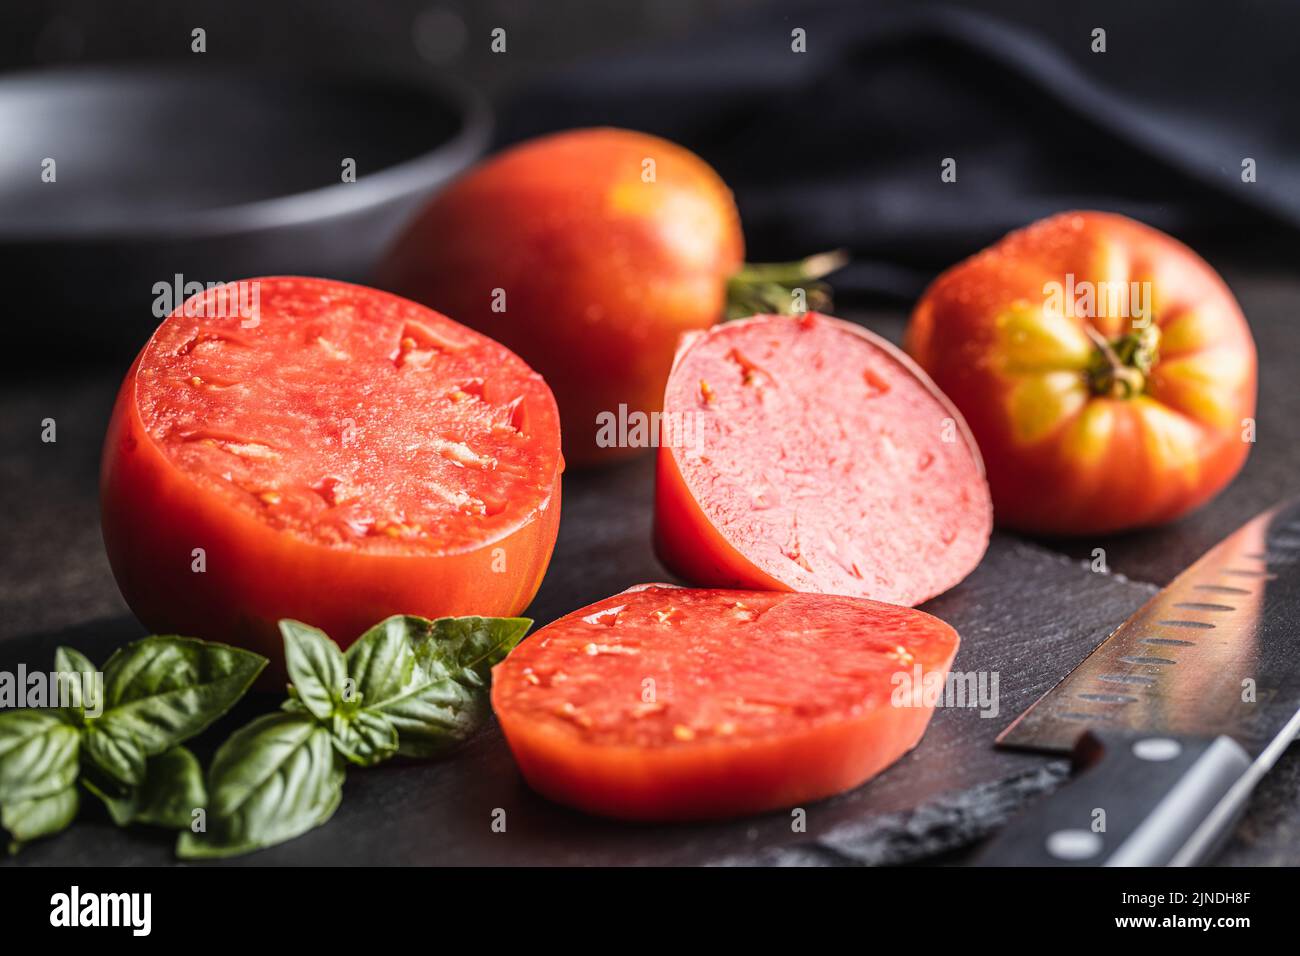 Sliced bull heart tomatoes on a black table. Stock Photo